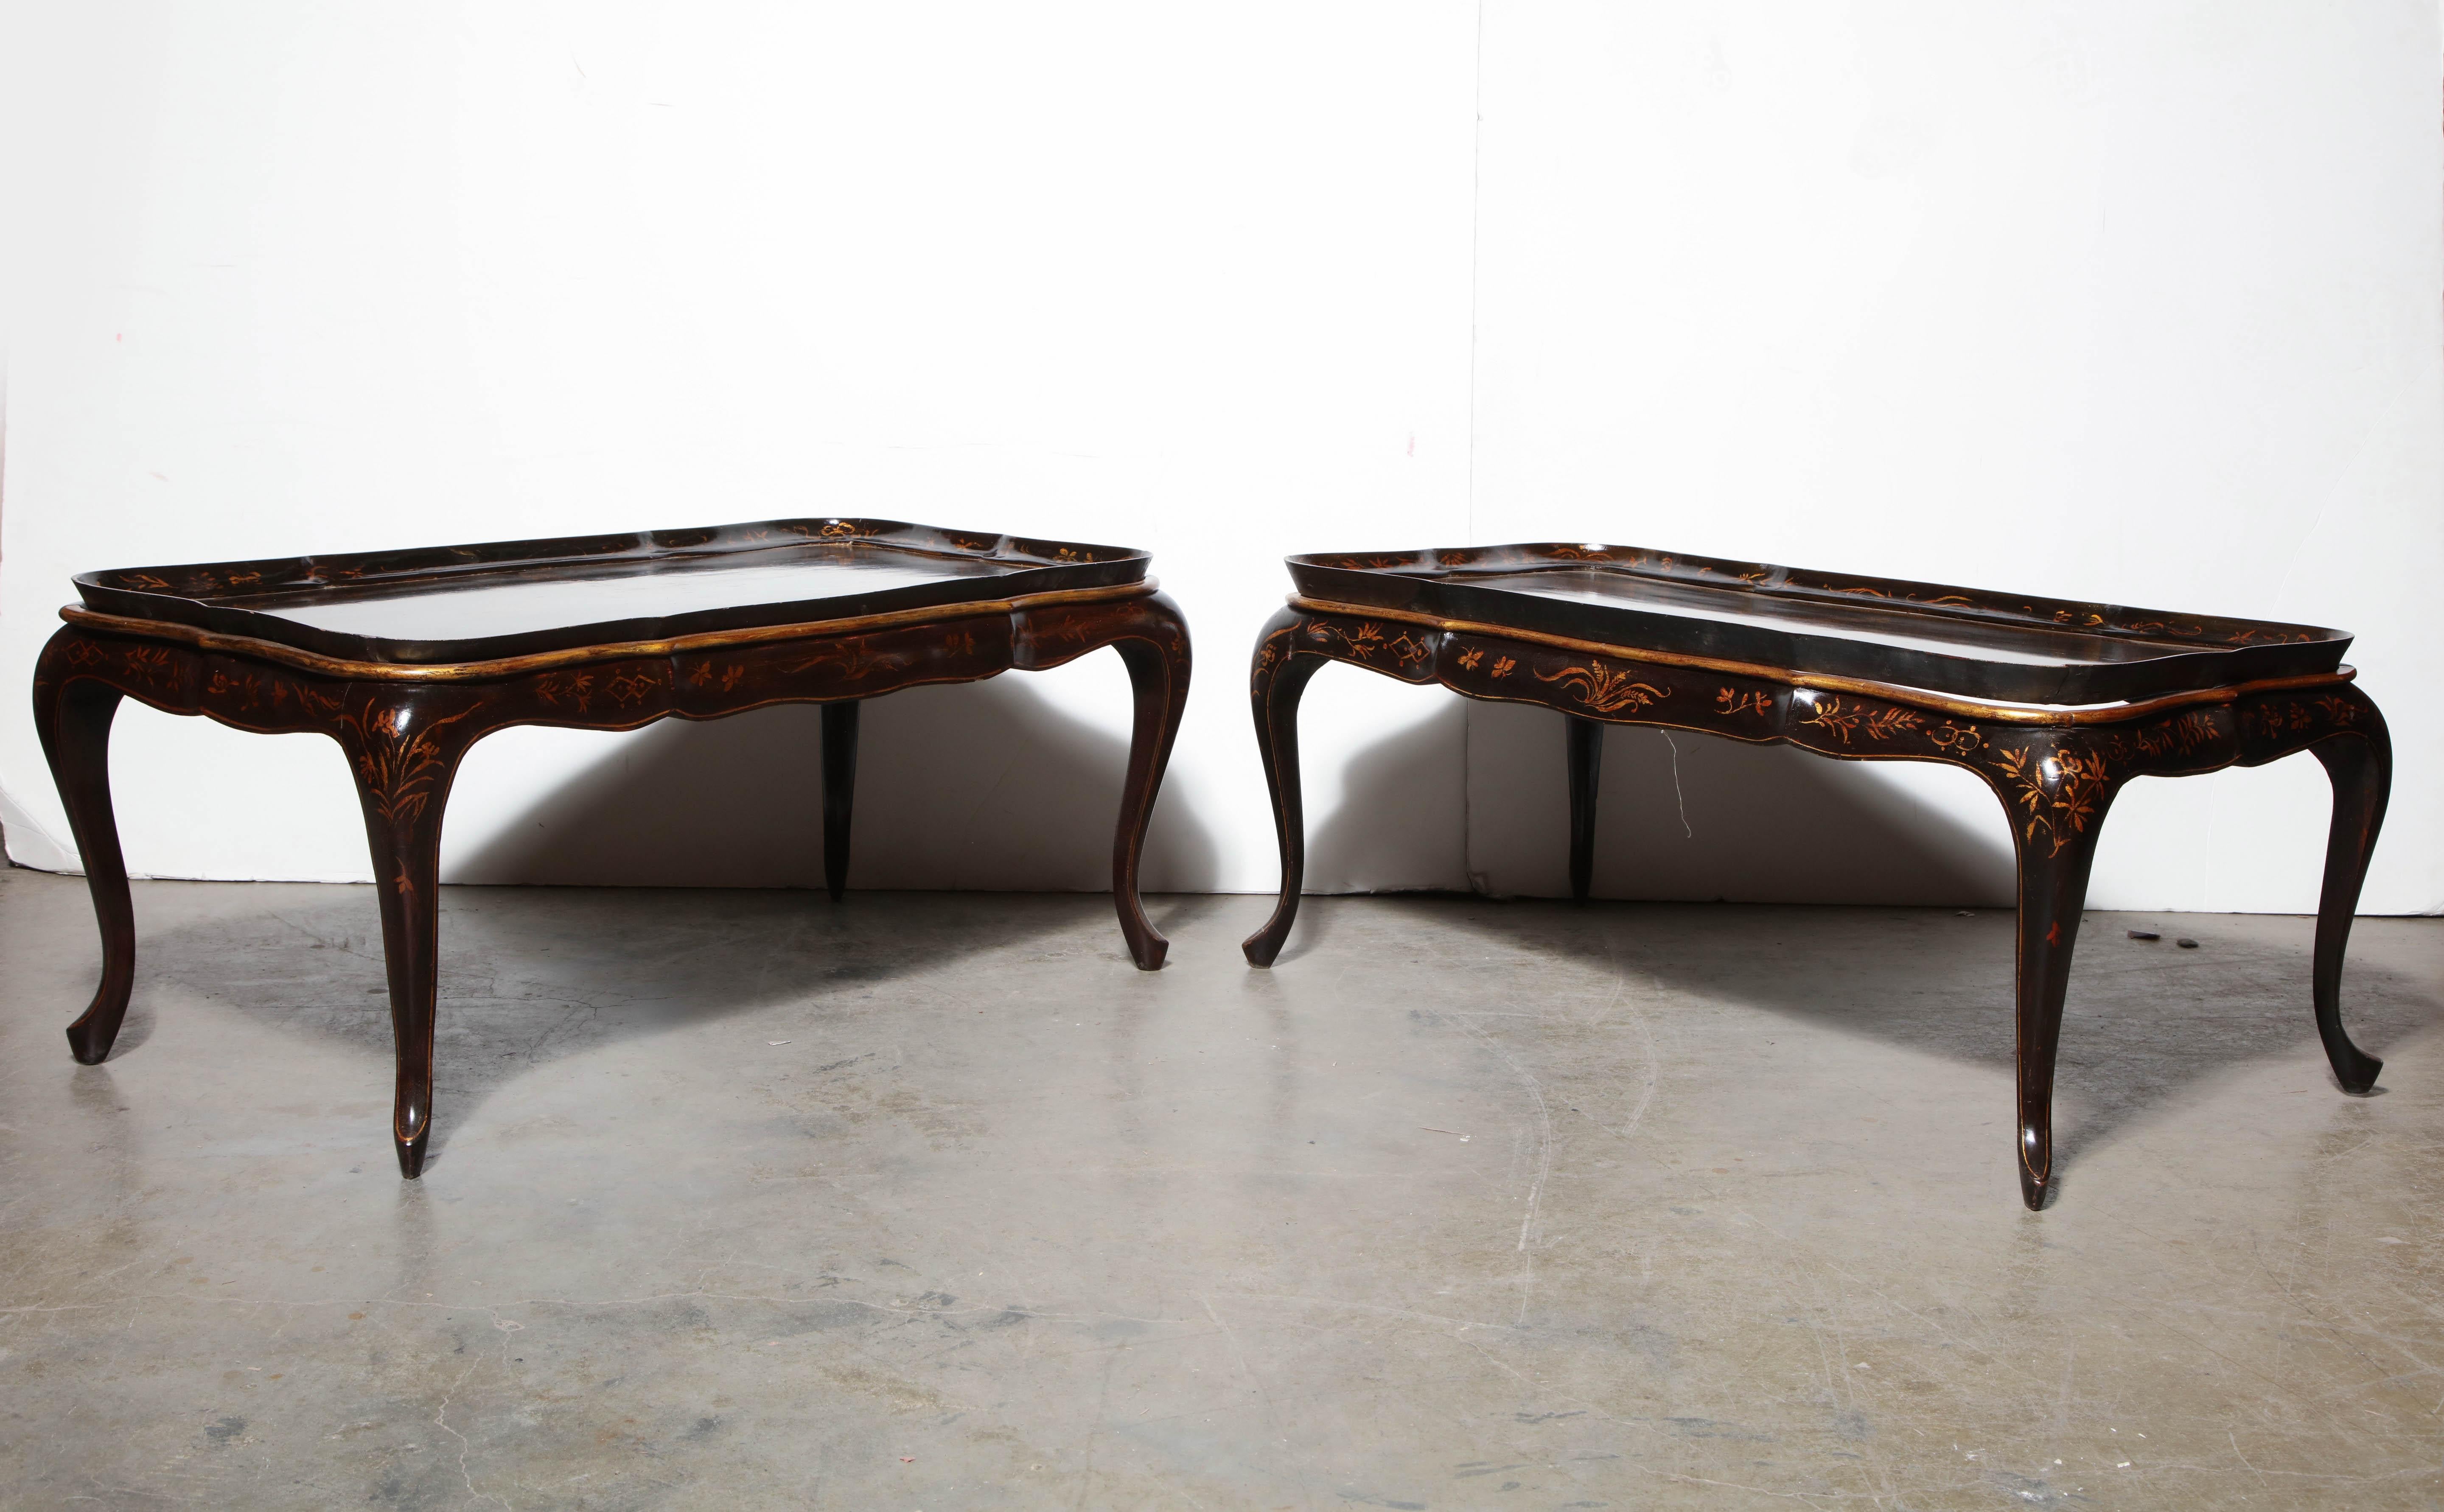 Two Chinese Lacquered Coffee Tables 1